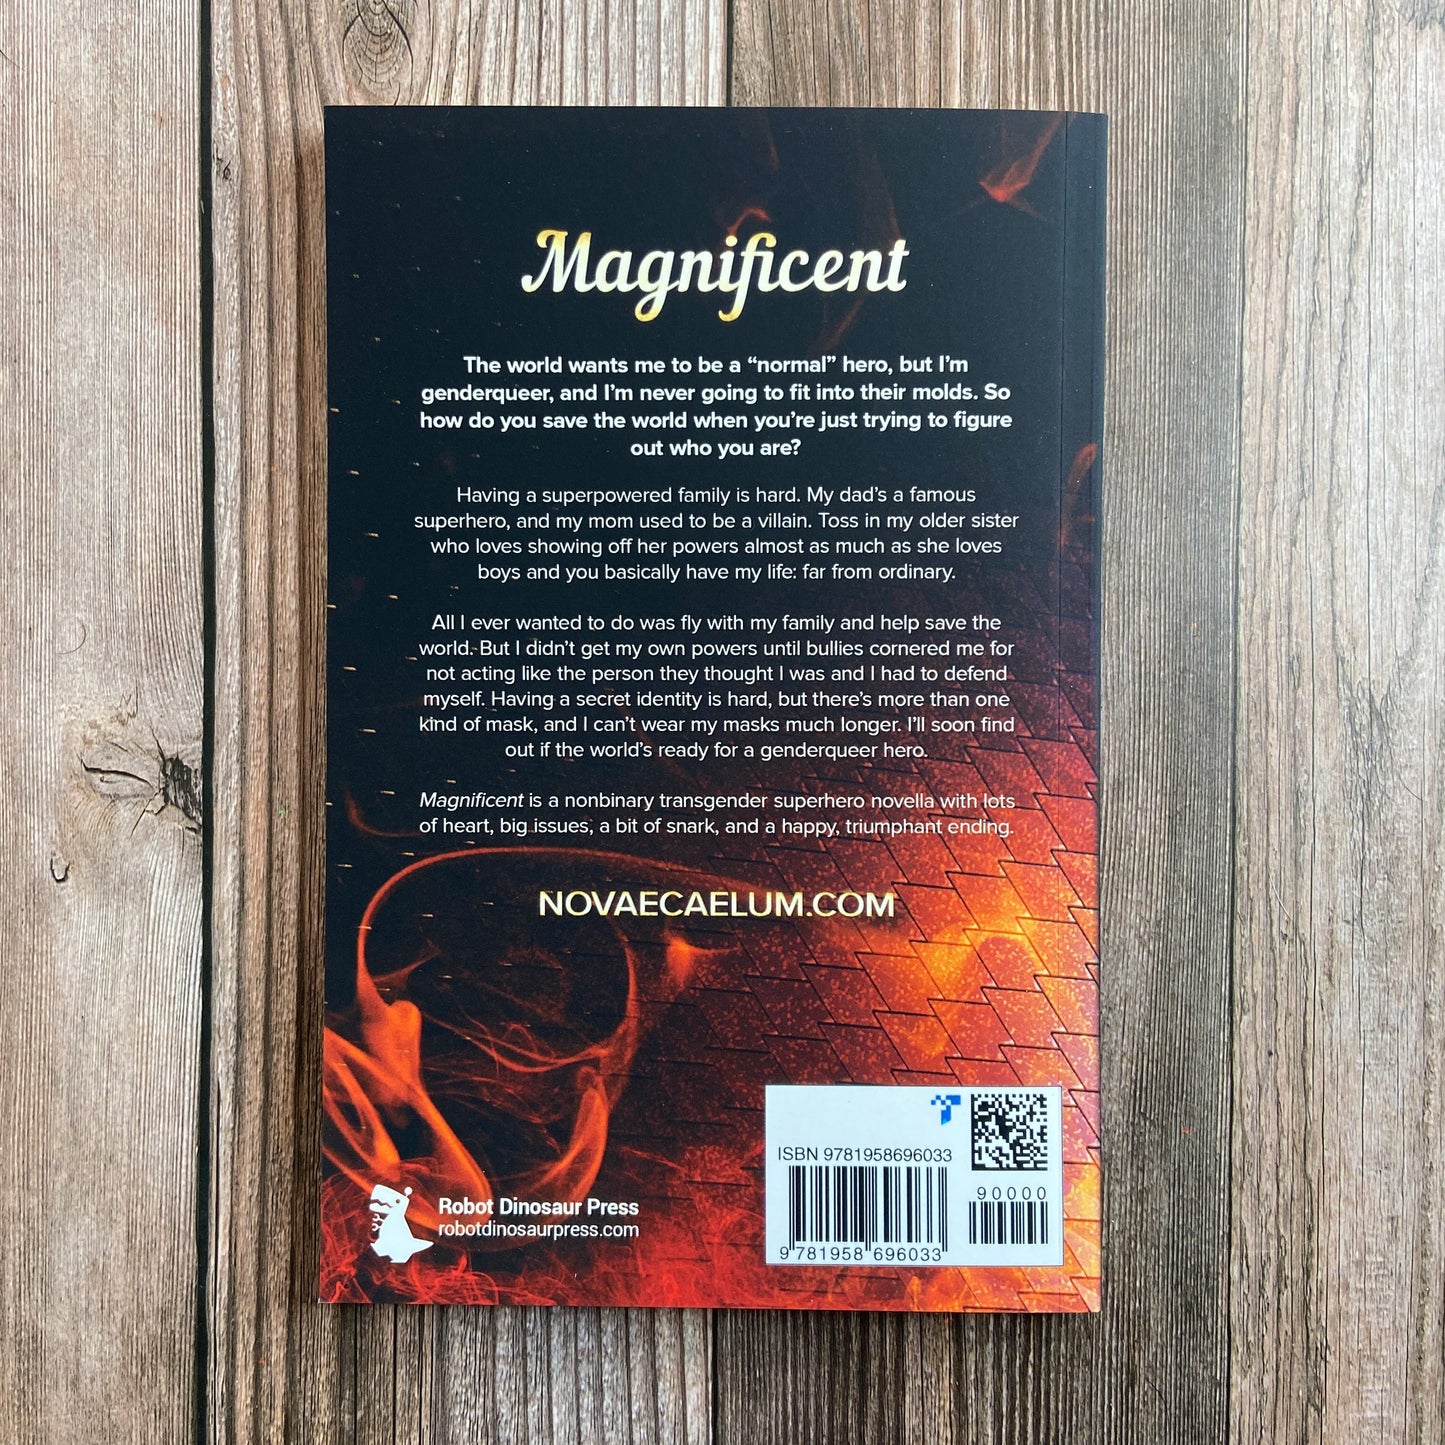 The back cover of the SIGNED Magnificent: A Nonbinary Superhero Novella (Paperback) by Novae Caelum is superpowered and features a genderqueer hero with a secret identity.